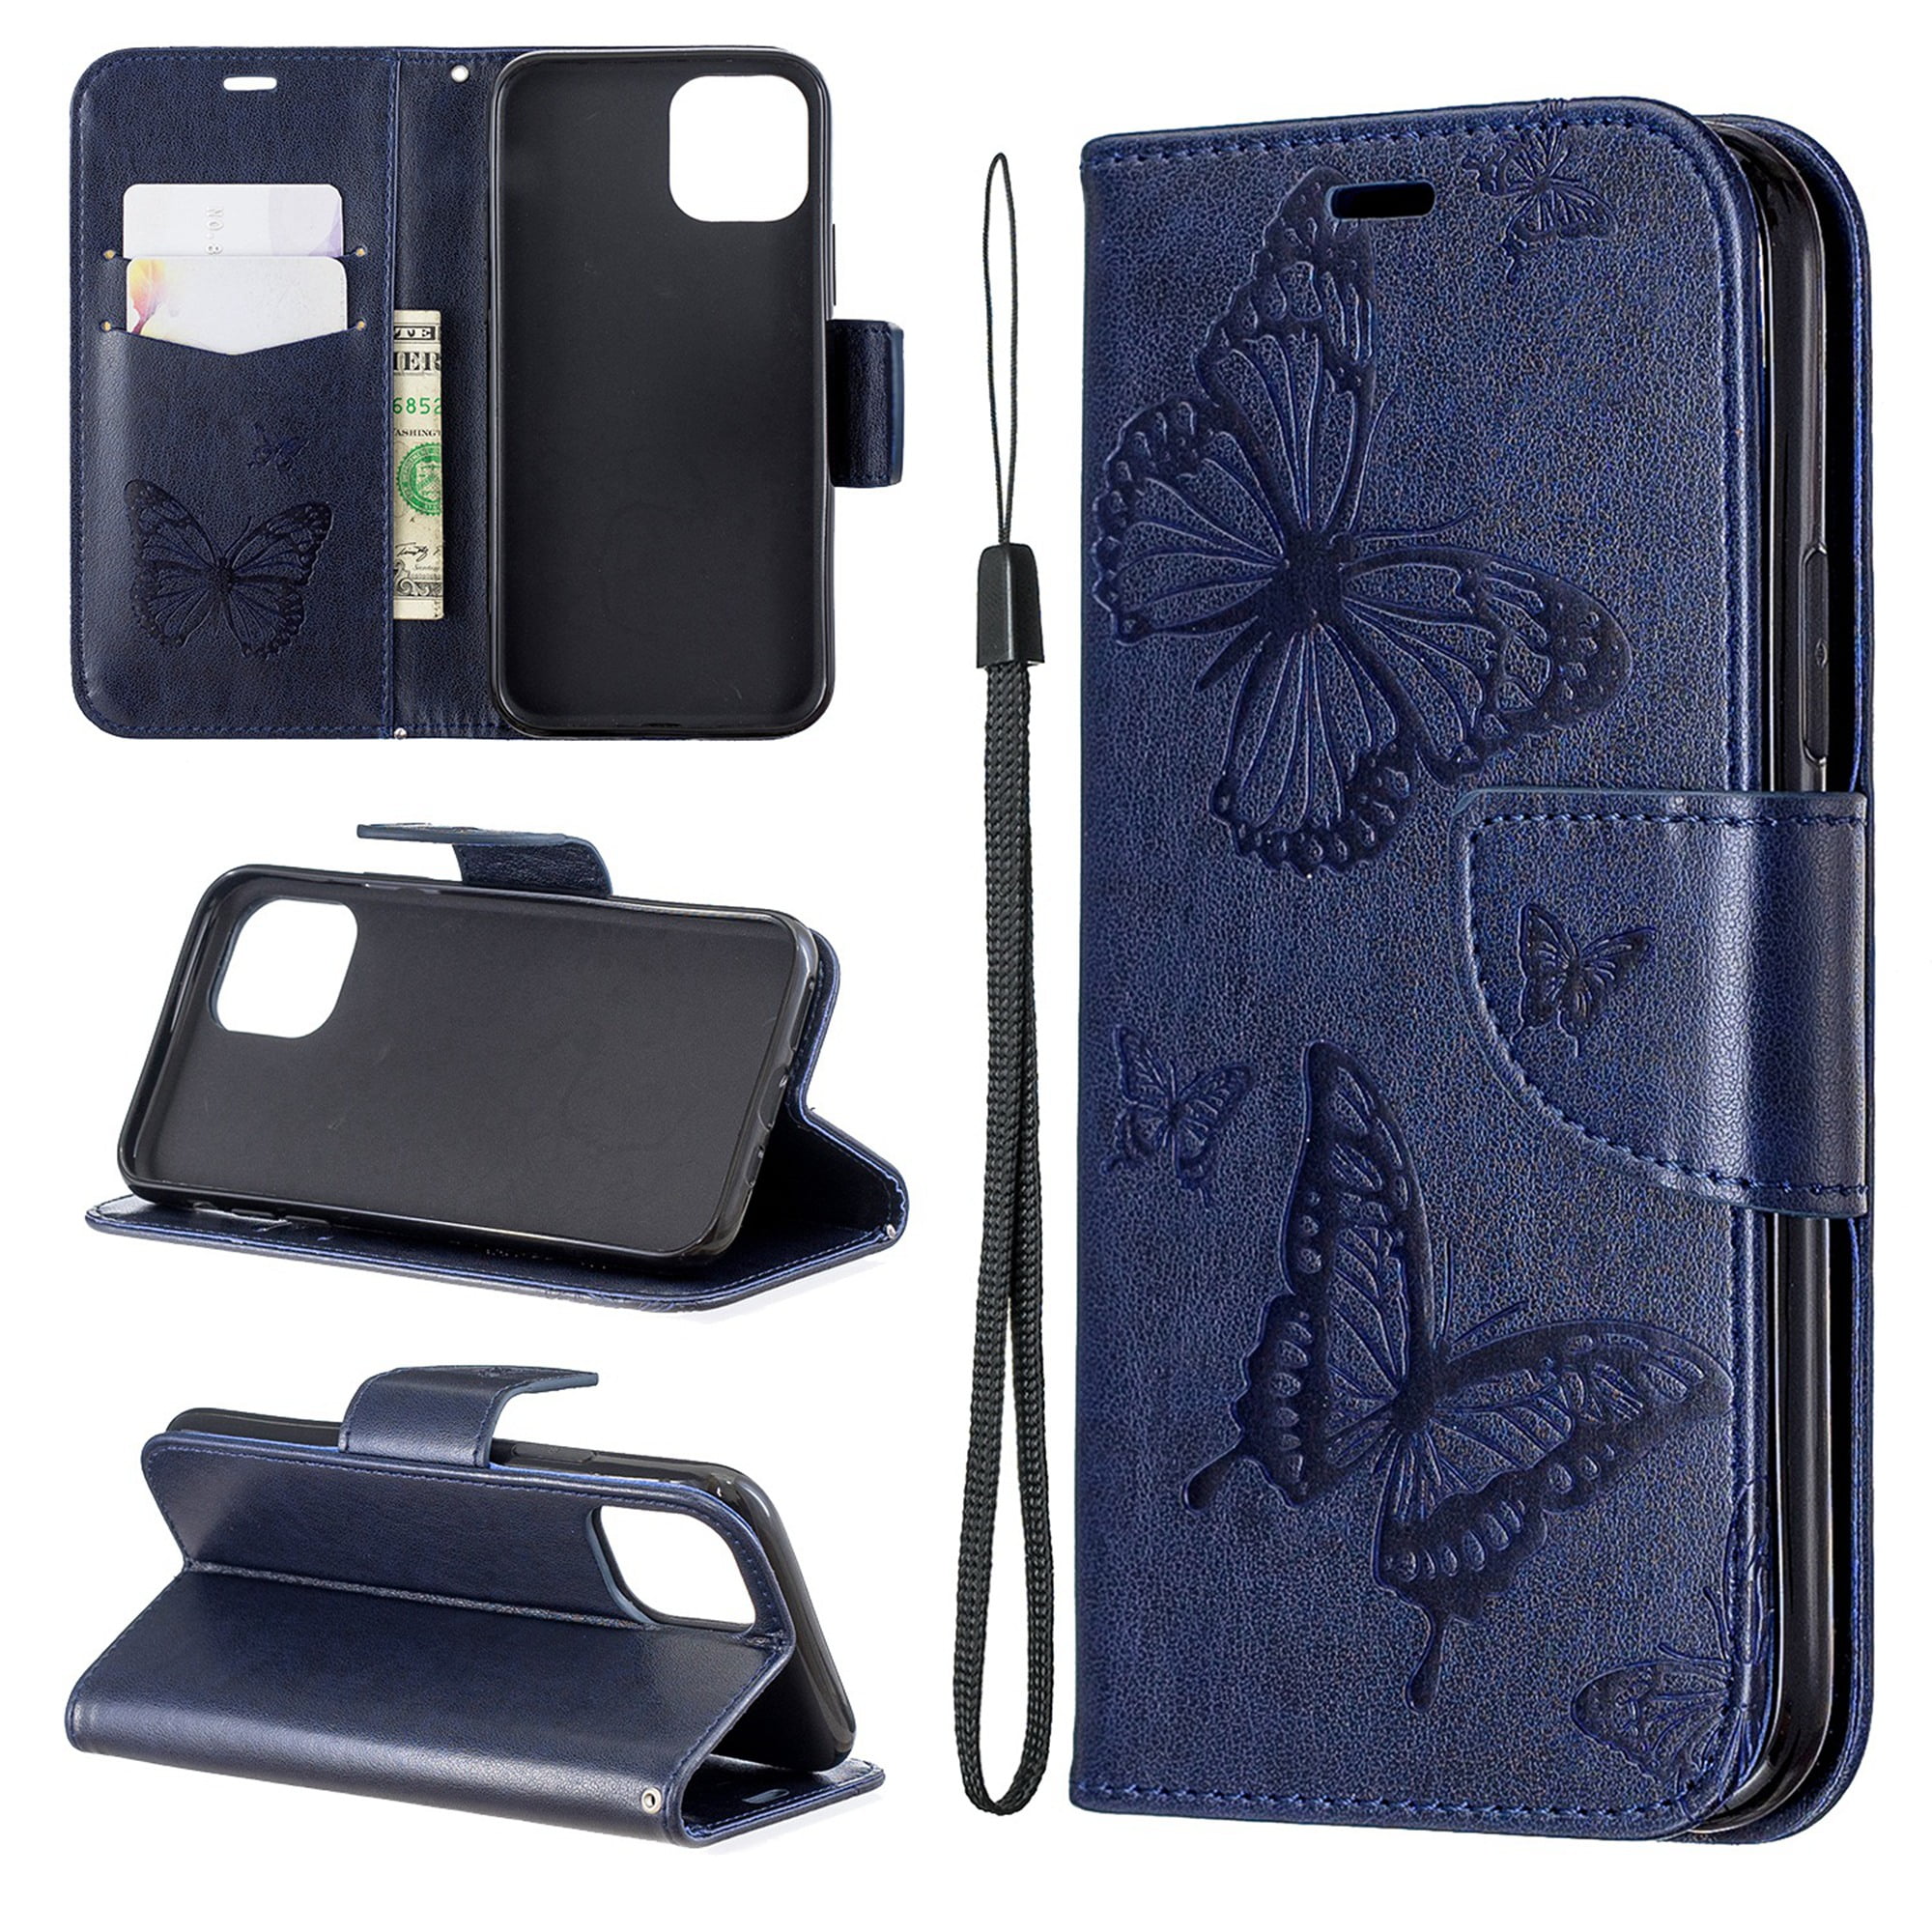 Blue PU Leather Wallet Cover Compatible with iPhone 11 Flip Case for iPhone 11 